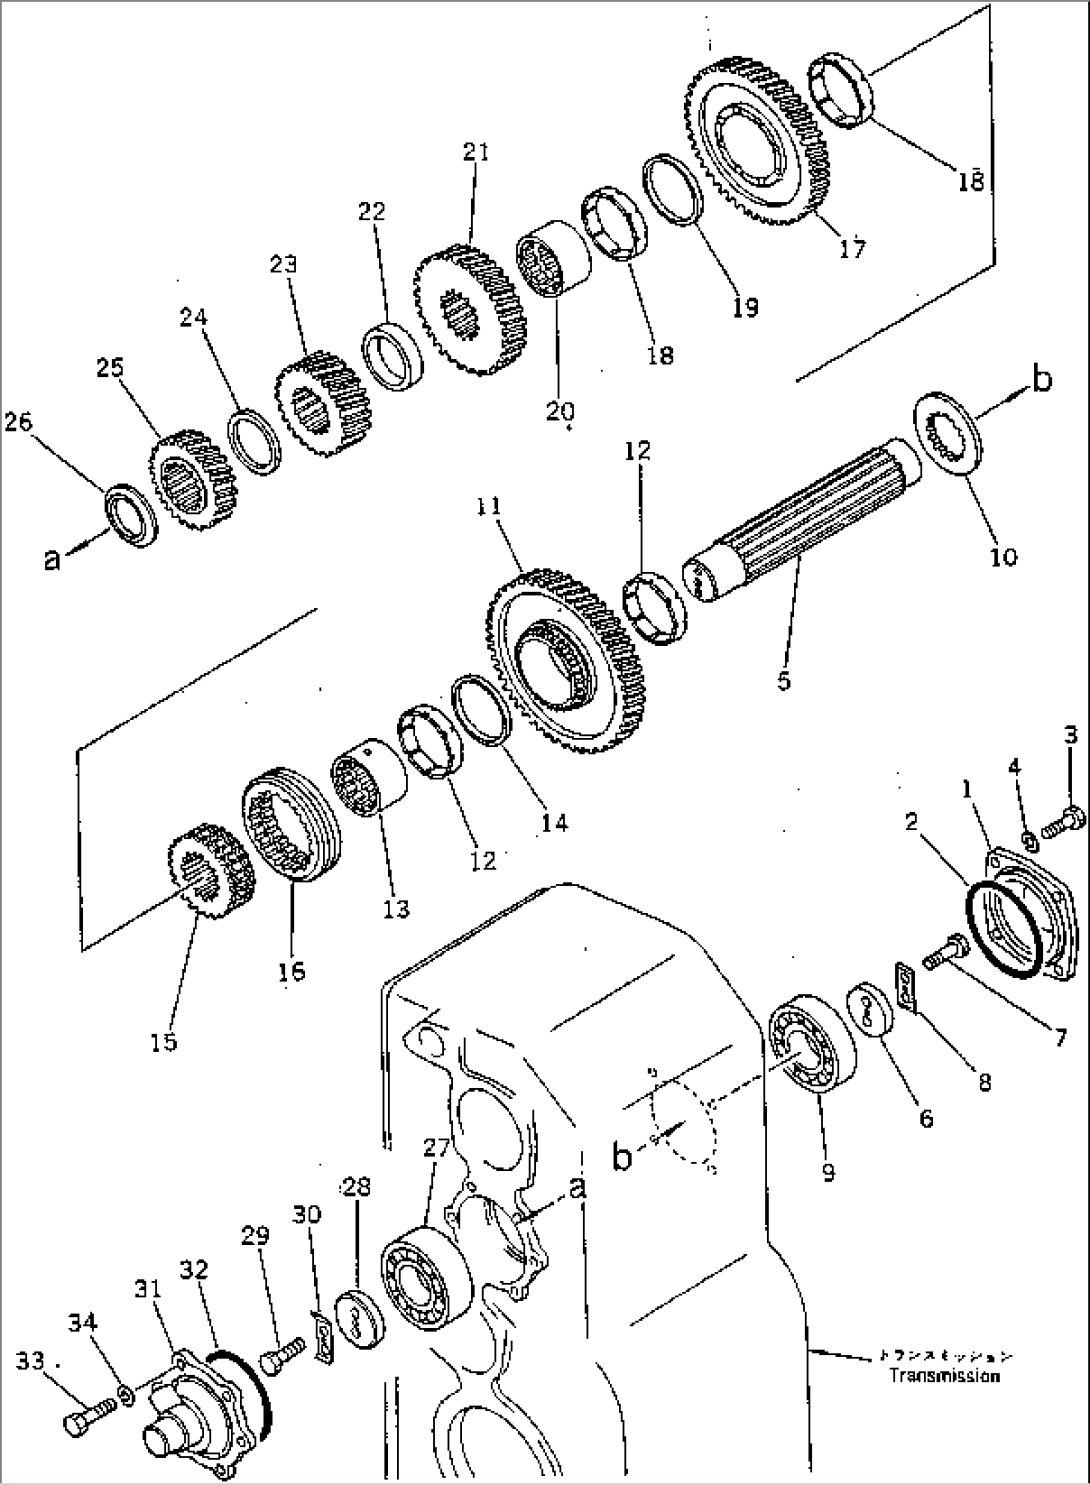 TRANSMISSION (1ST AND 2ND GEAR)